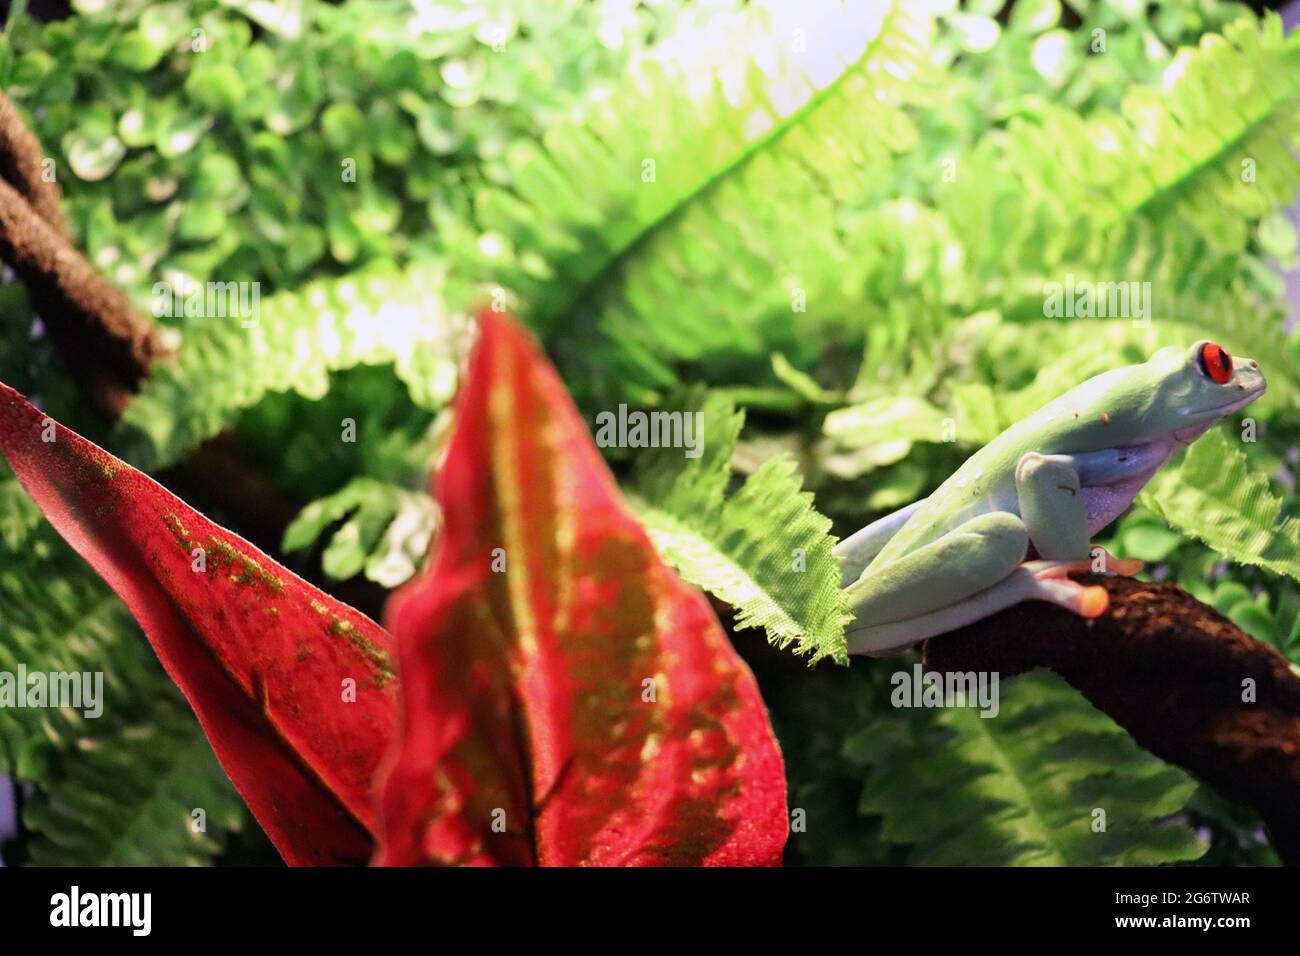 red eyed tree frog on red and green leaves Stock Photo